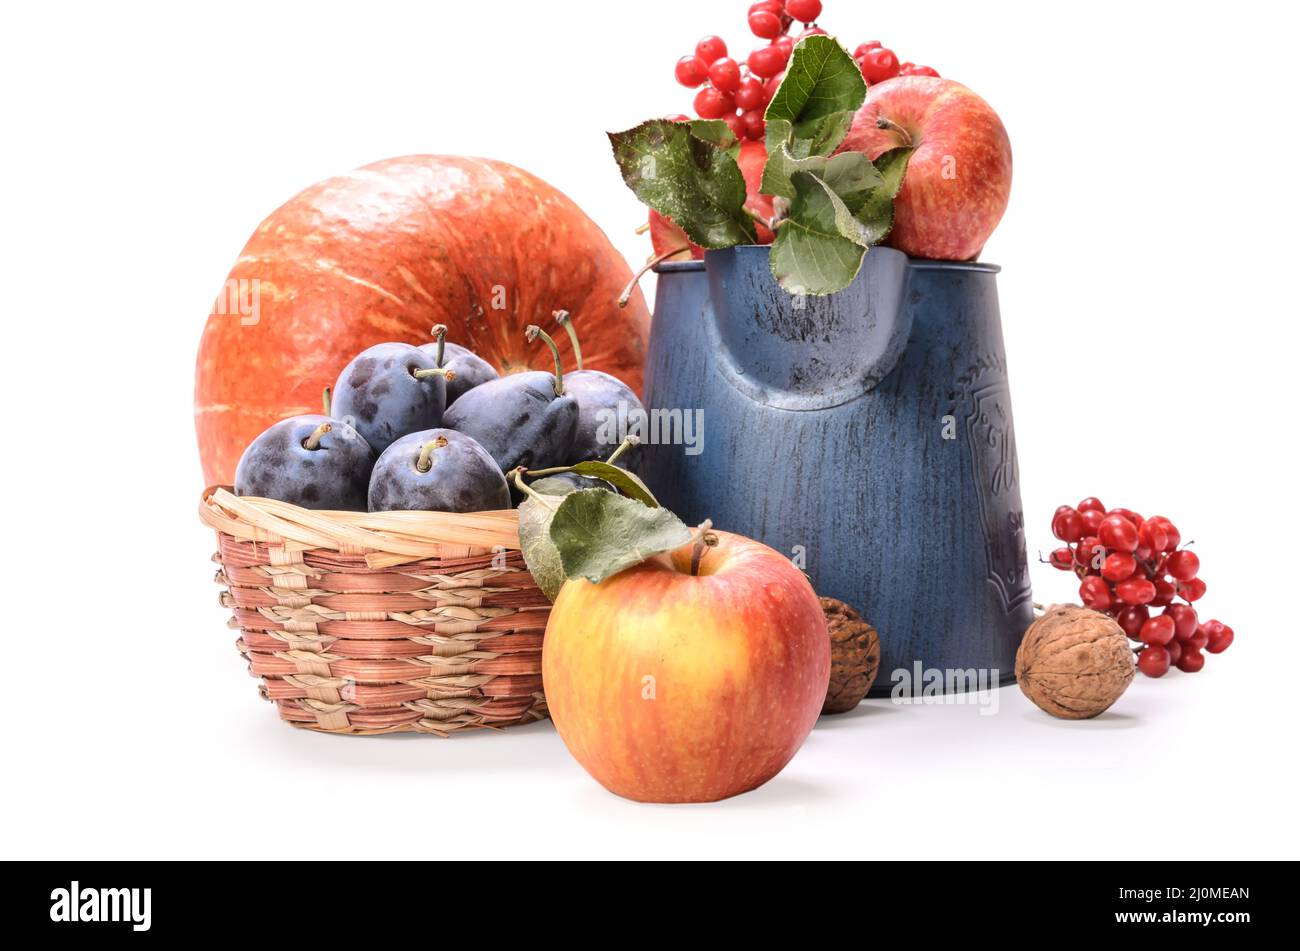 Apples in a garden jug and other fruits on a white background with soft shadow Stock Photo